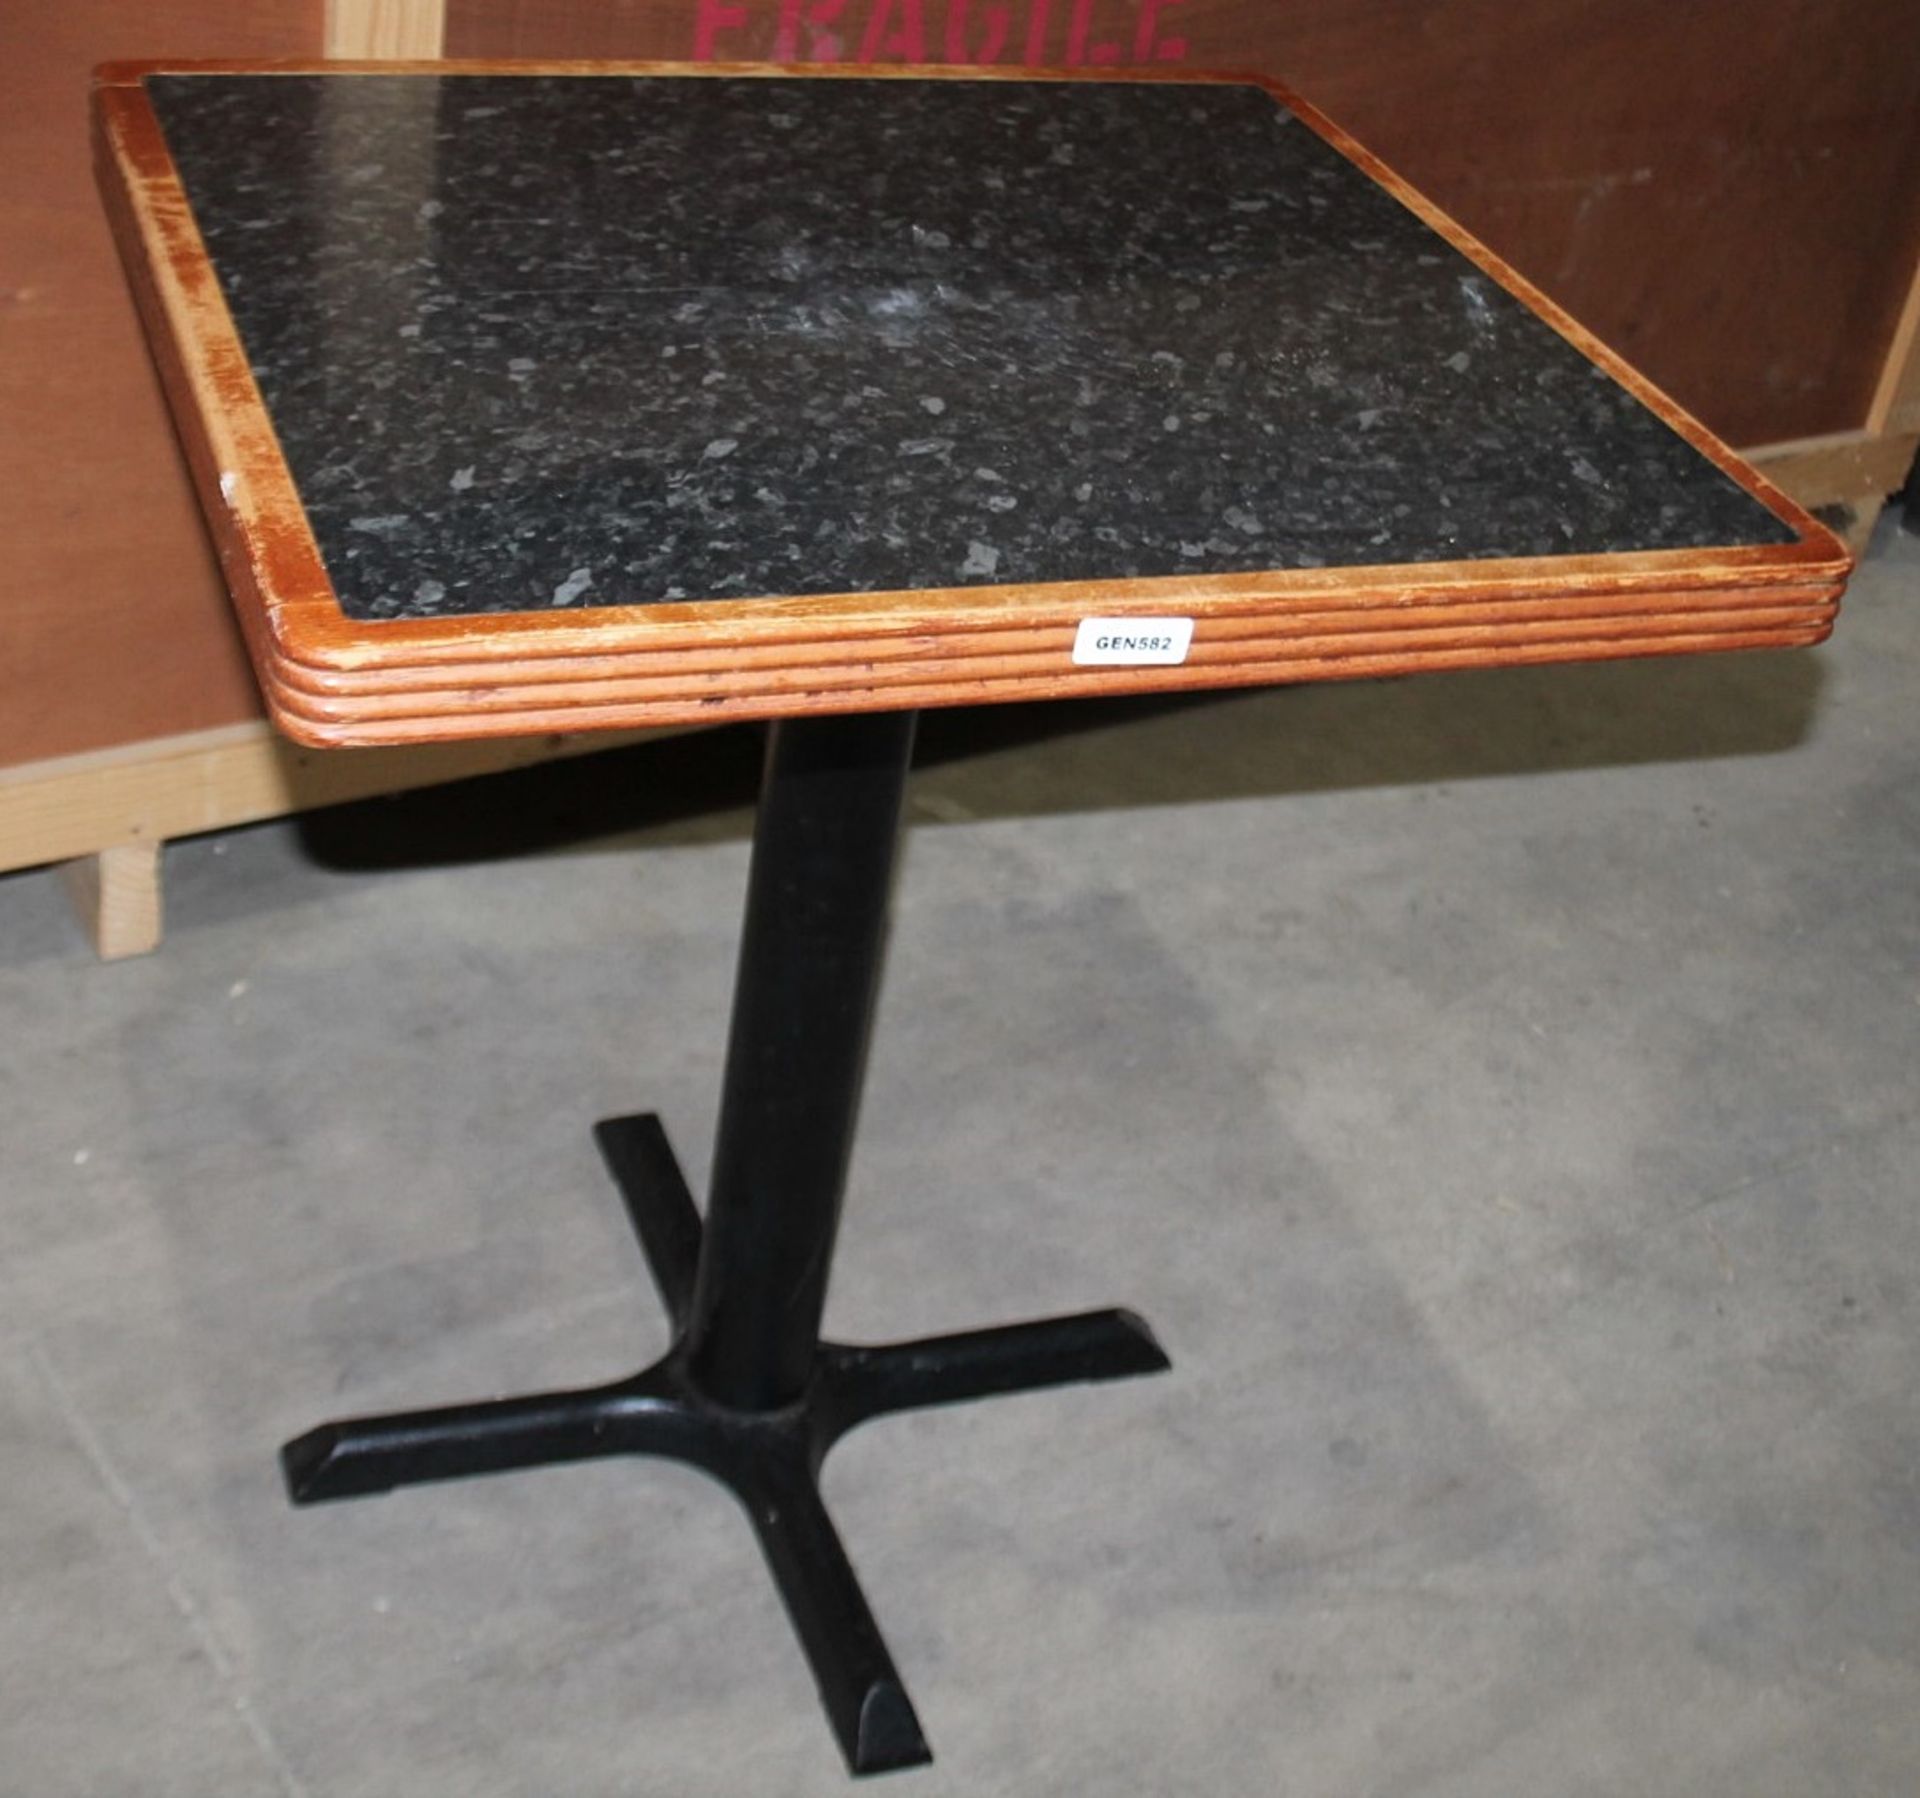 4 x Square Restaurant Dining Tables With Granite Style Surface, Wooden Edging and Cast Iron - Image 2 of 2